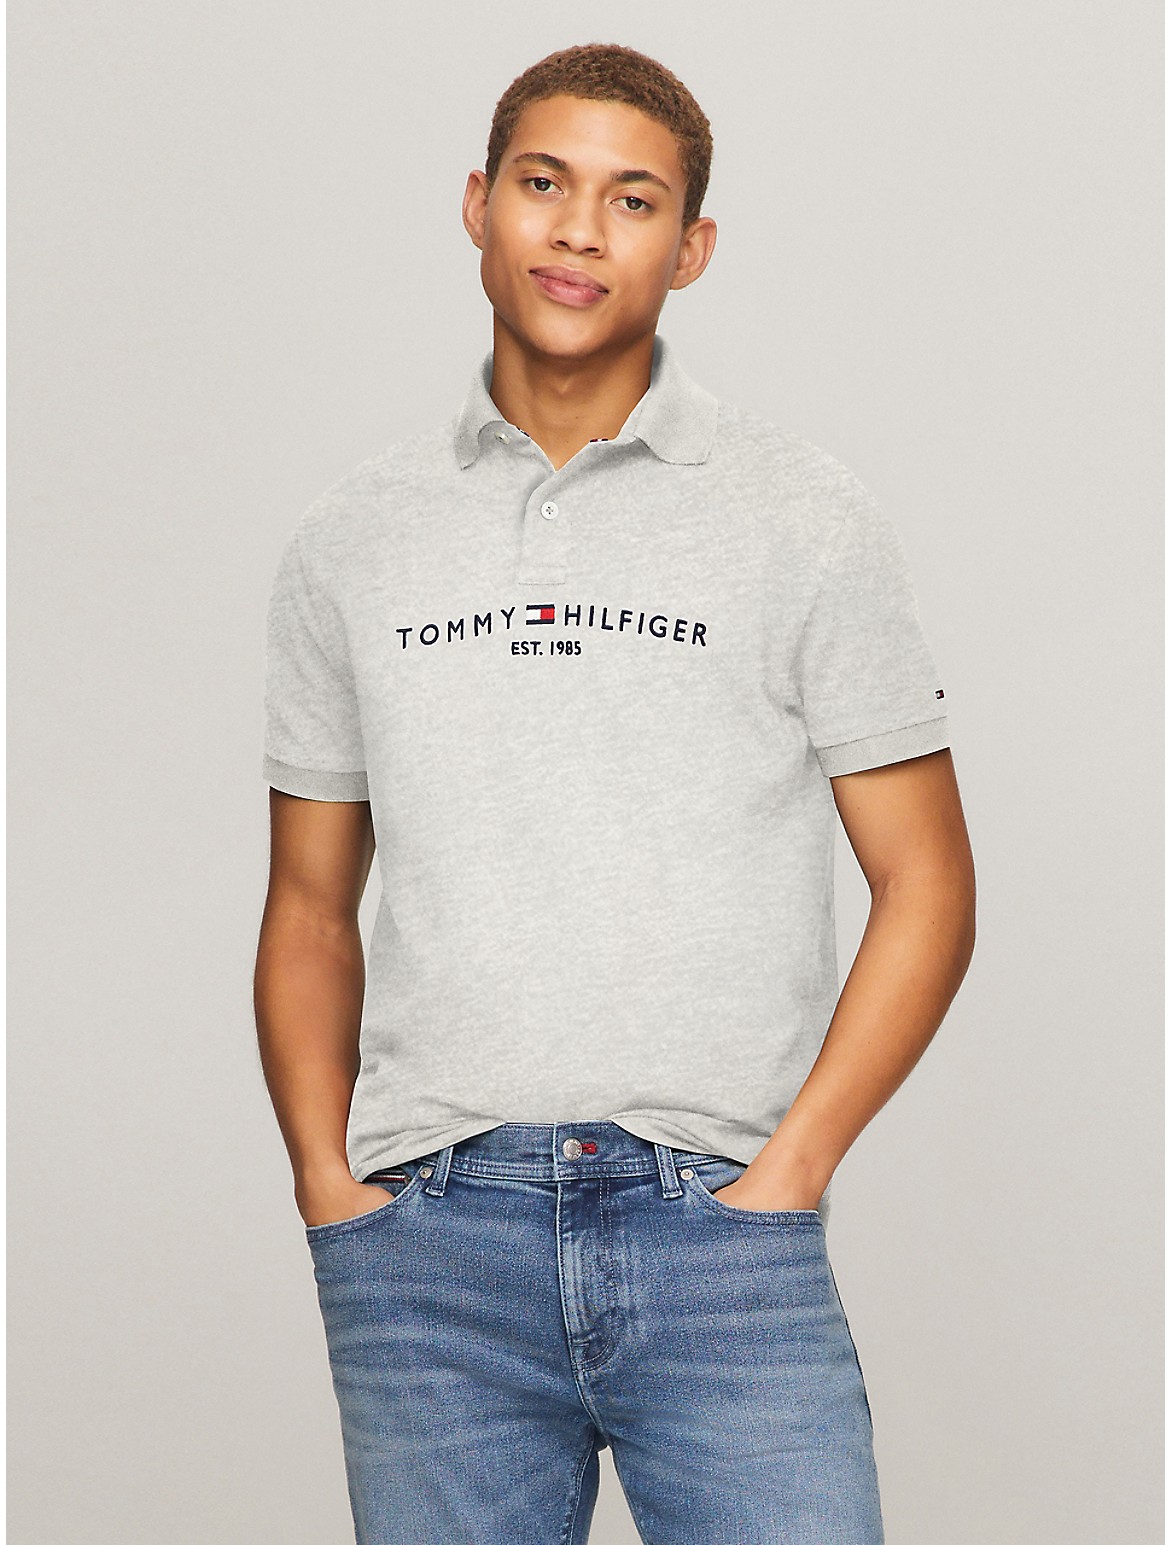 Tommy Hilfiger Men's Regular Fit Embroidered Tommy Graphic Polo - Grey - XXL